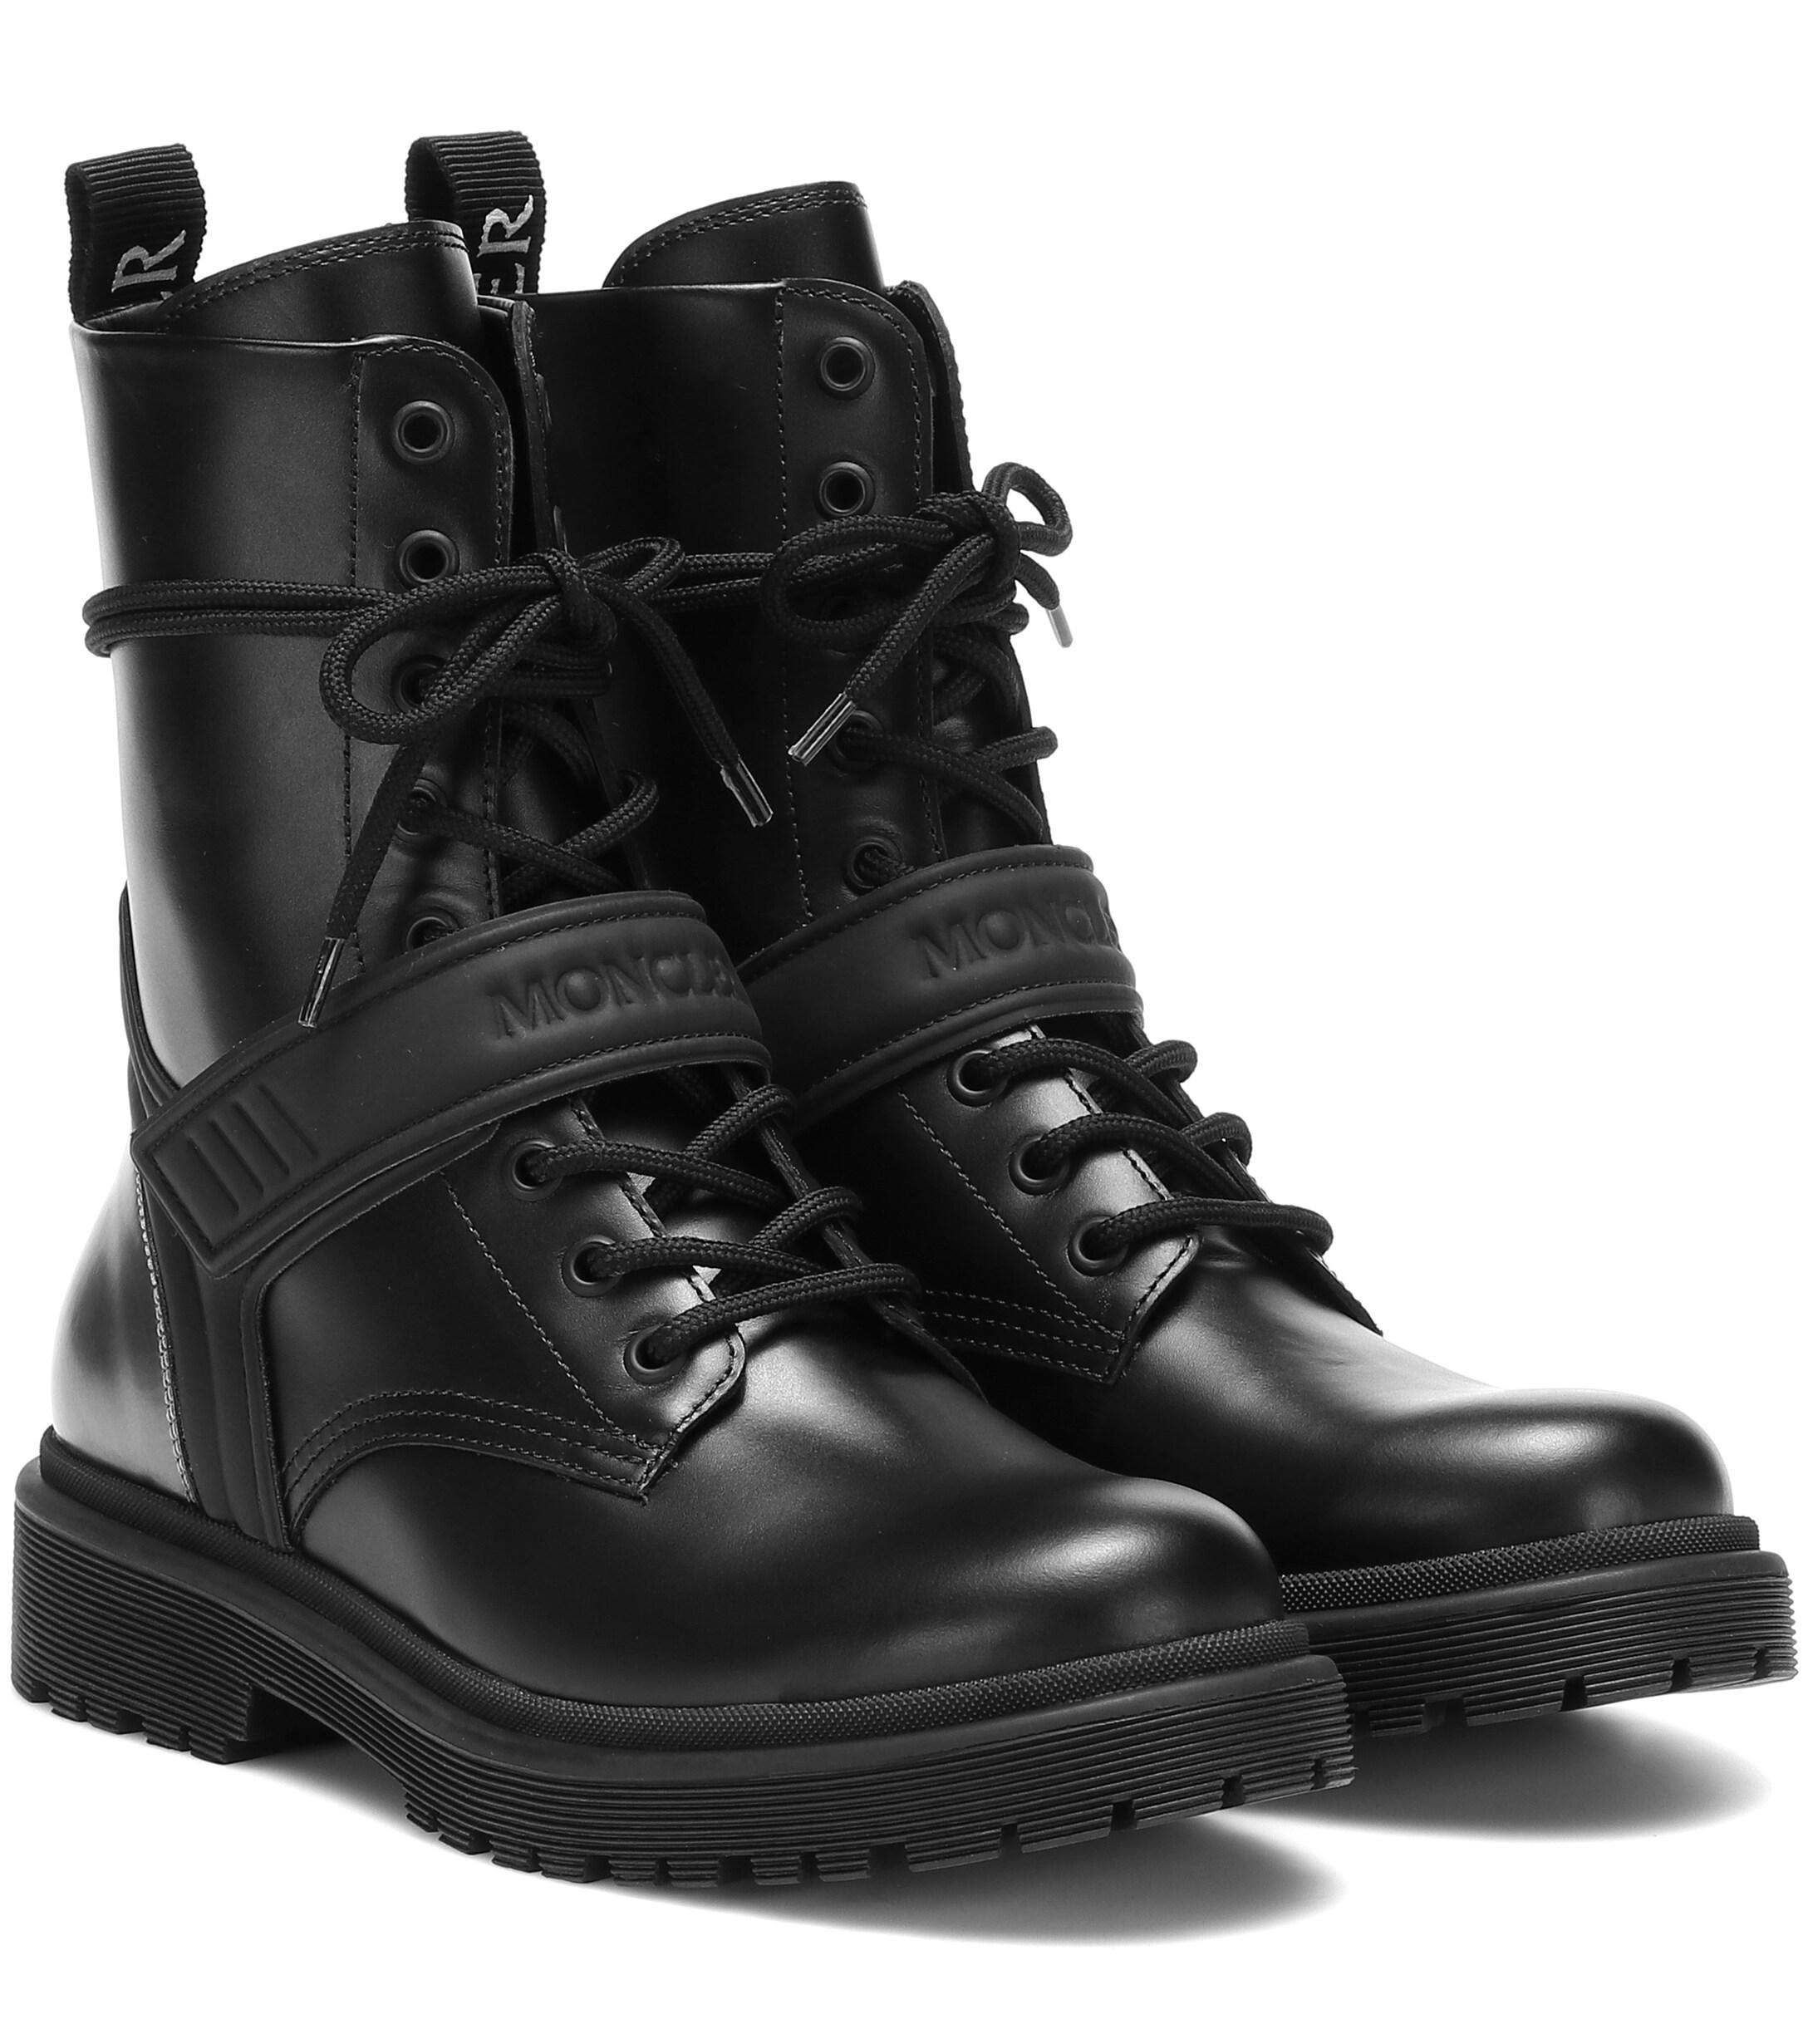 Moncler Calypso Leather Ankle Boots in Black - Lyst